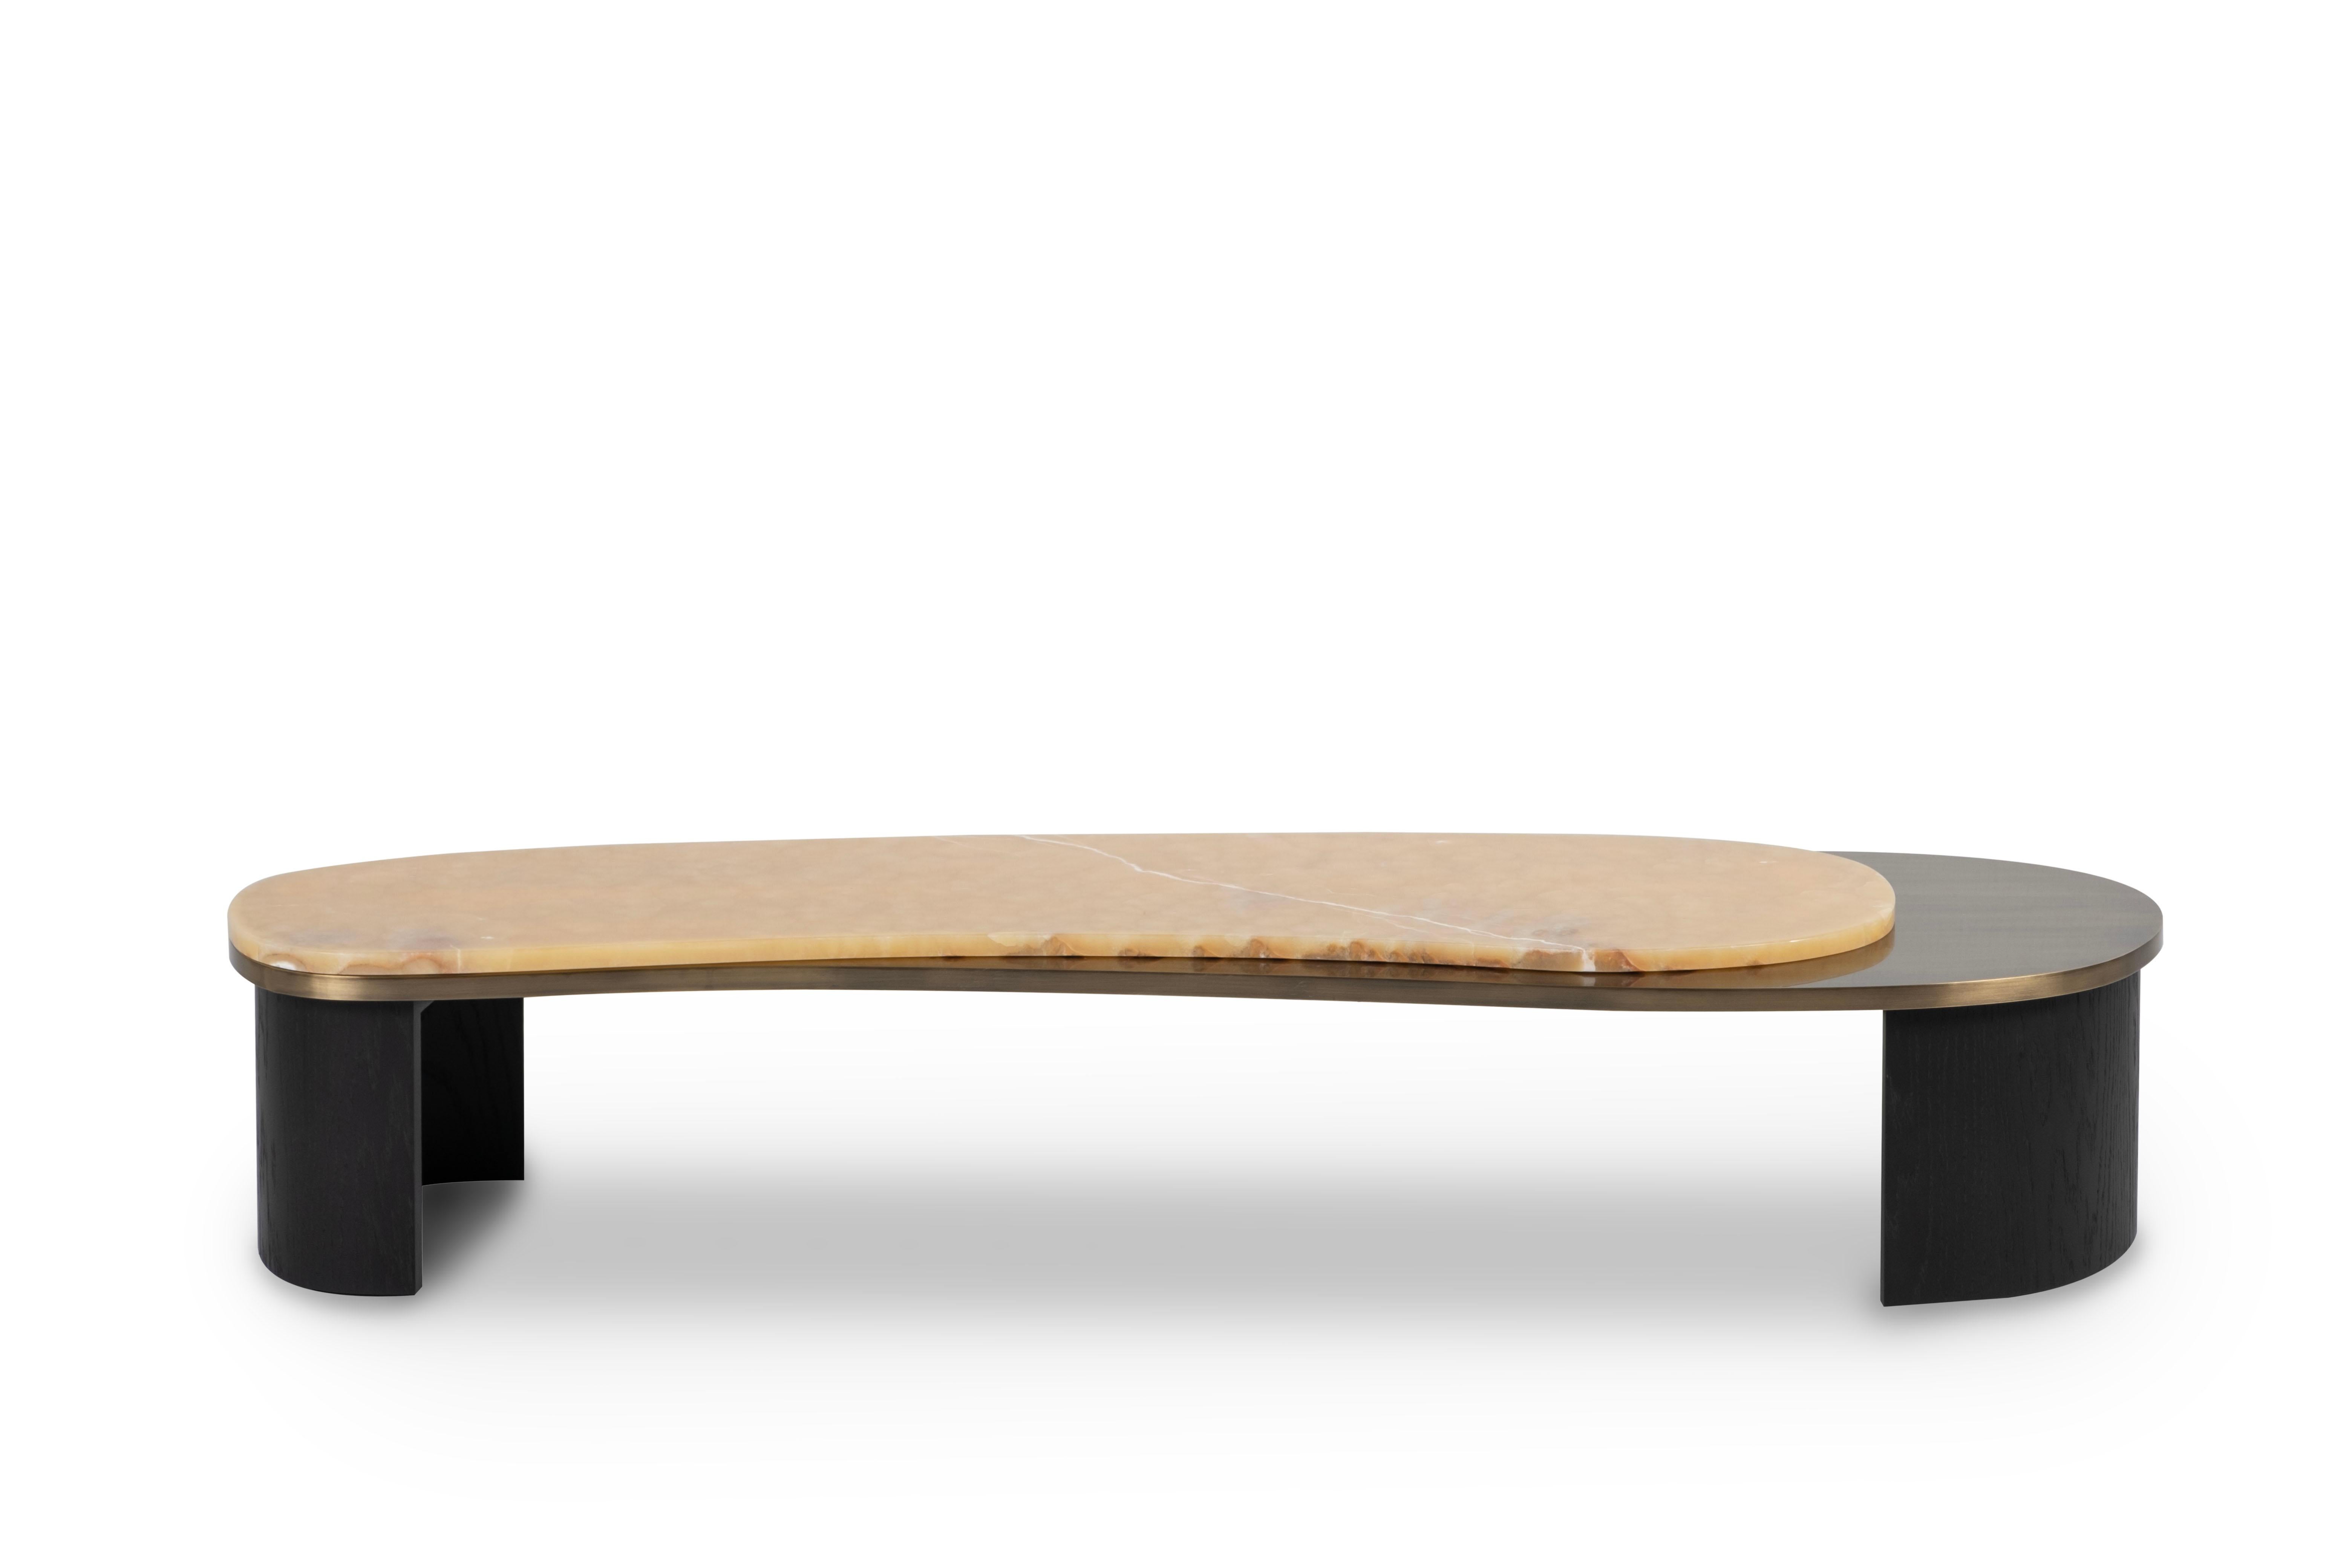 Armona coffee table, Contemporary Collection, handcrafted in Portugal - Europe by Greenapple.

Designed by Rute Martins for the Contemporary Collection, the Armona modern coffee table pays homage to the natural beauty and organic lines of Armona